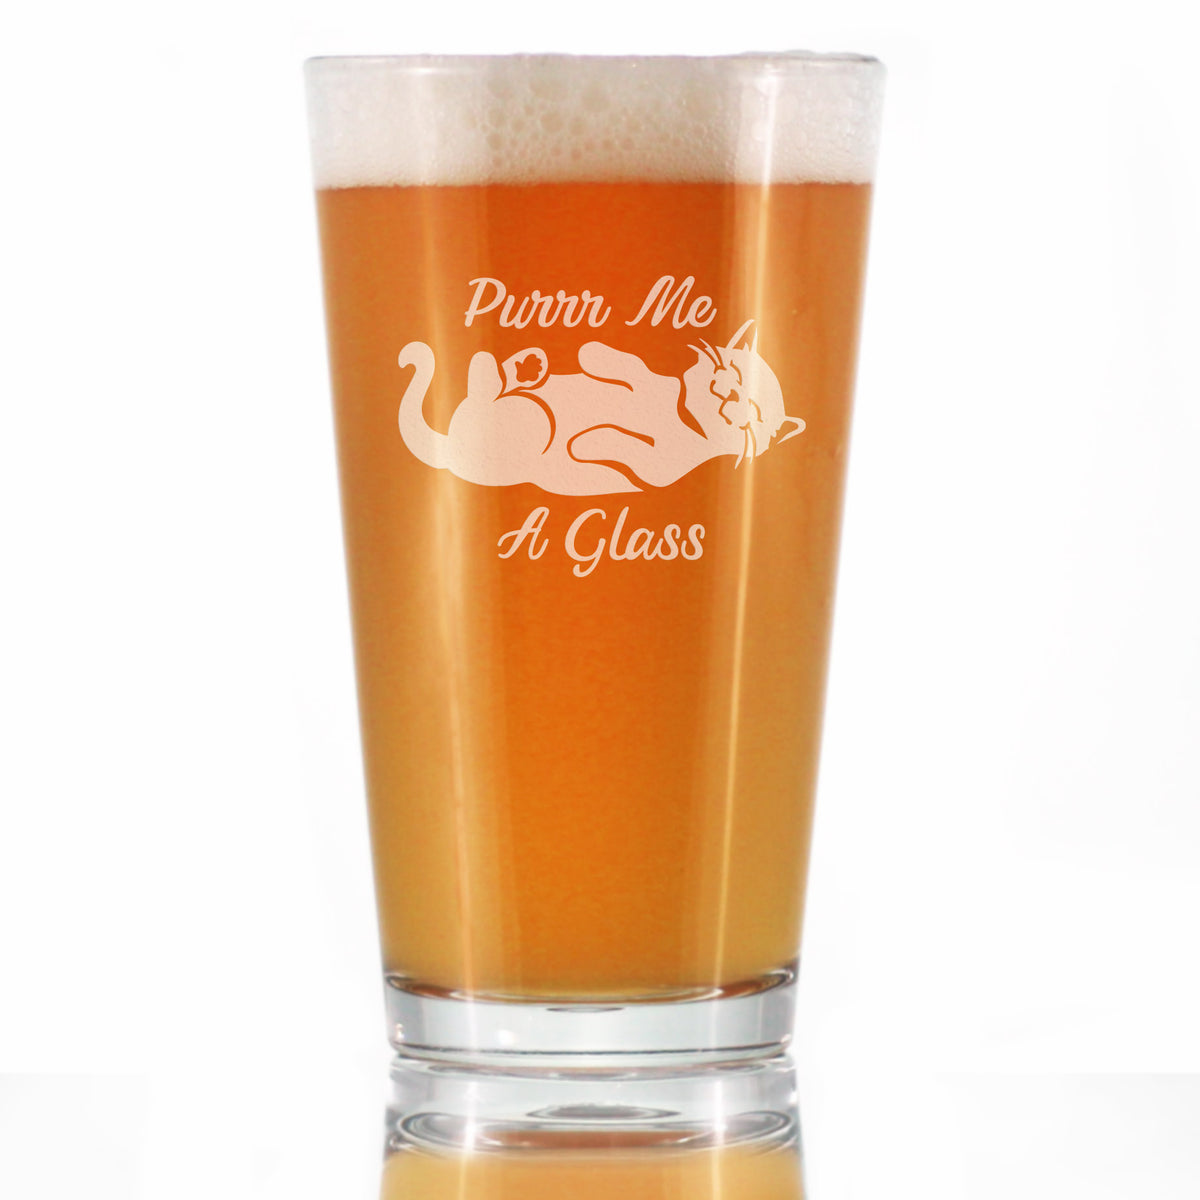 Purr Me a Glass - Funny Cat Pint Glass Gifts for Beer Drinking Men &amp; Women - Fun Unique Kitty Décor - 16 oz